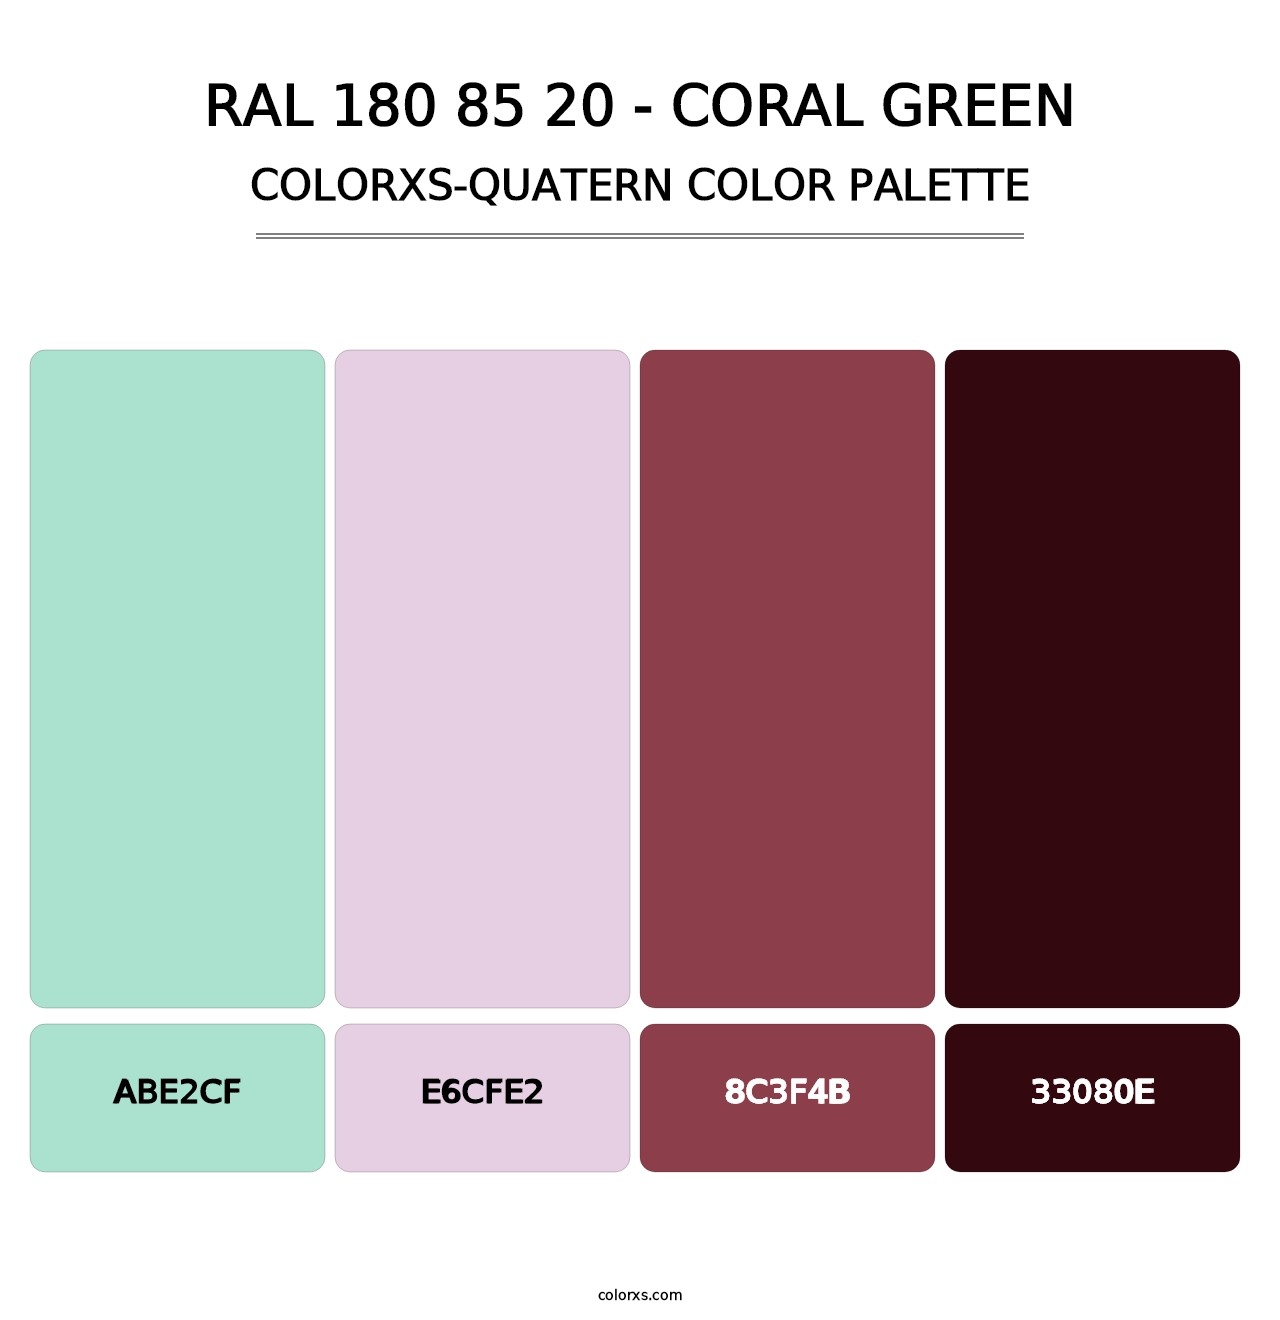 RAL 180 85 20 - Coral Green - Colorxs Quatern Palette